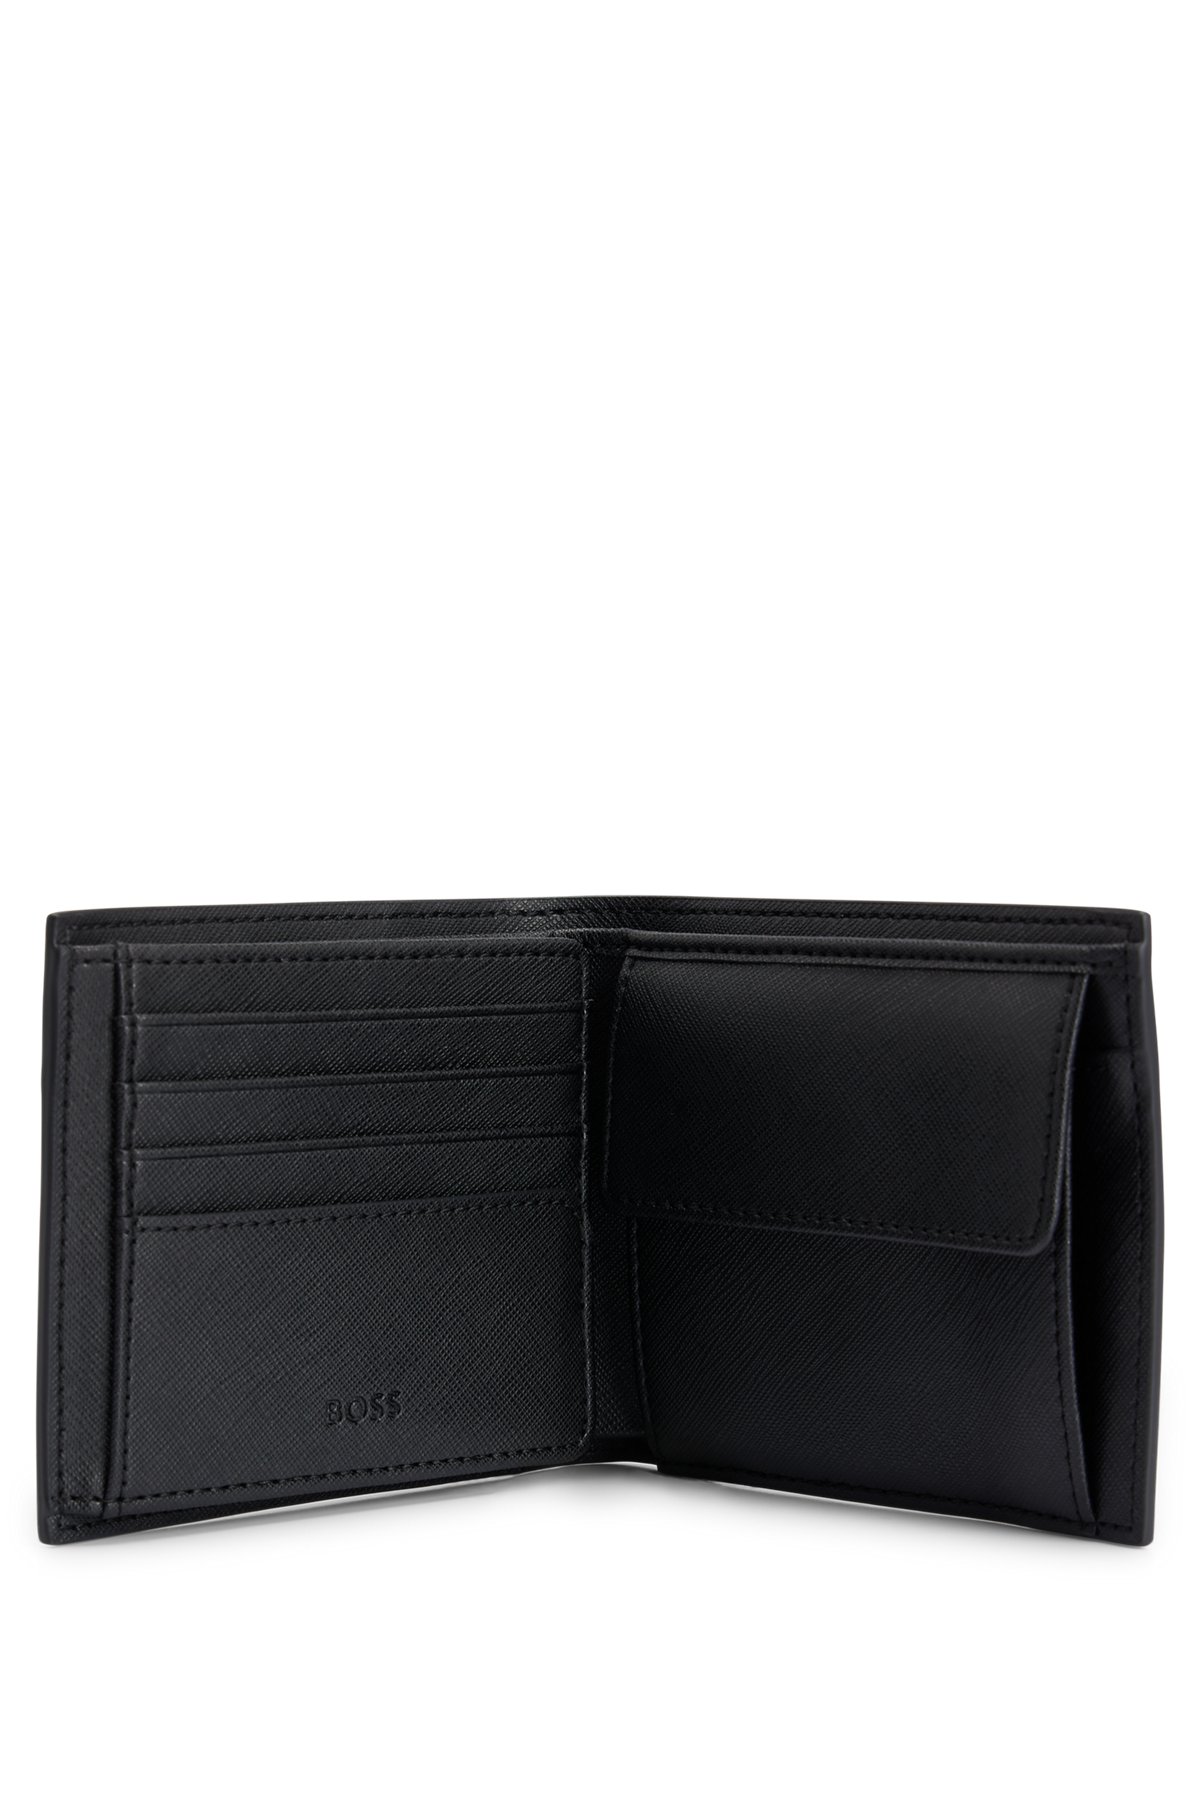 Structured trifold wallet with monogram detailing, Black